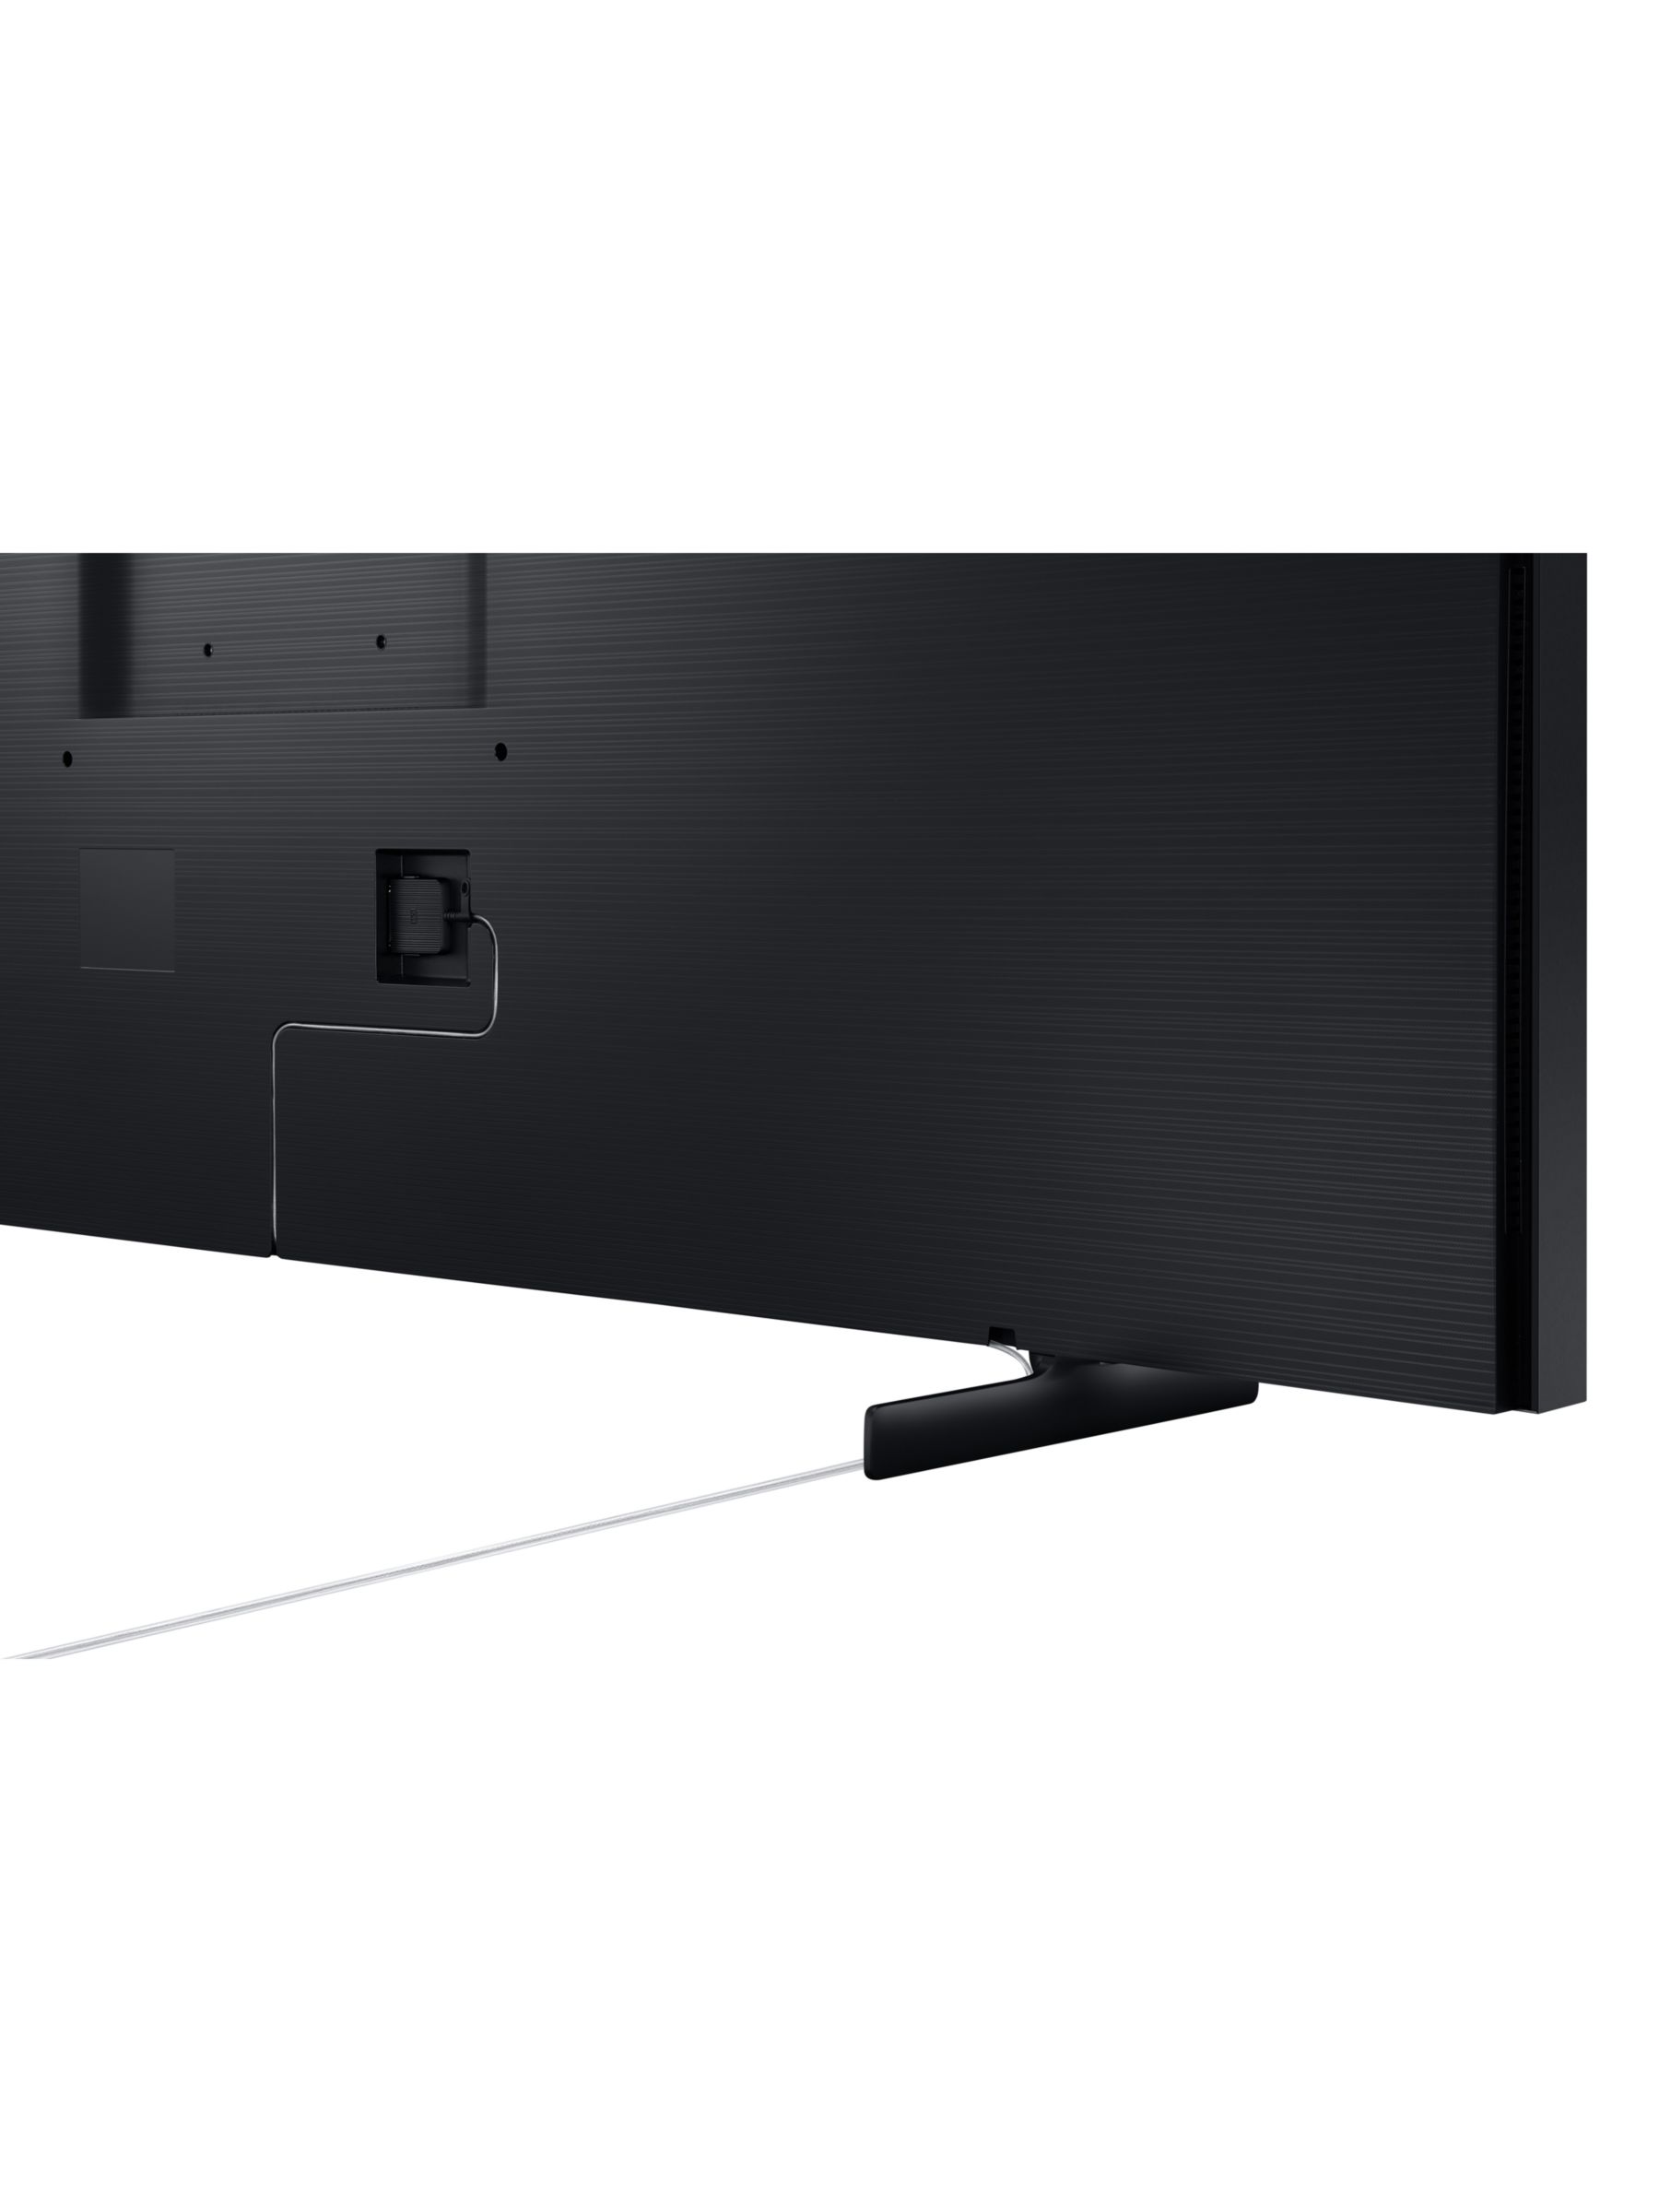 Samsung The Frame (2020) QLED Art Mode TV with No-Gap Wall Mount, 43 inch at John Lewis & Partners